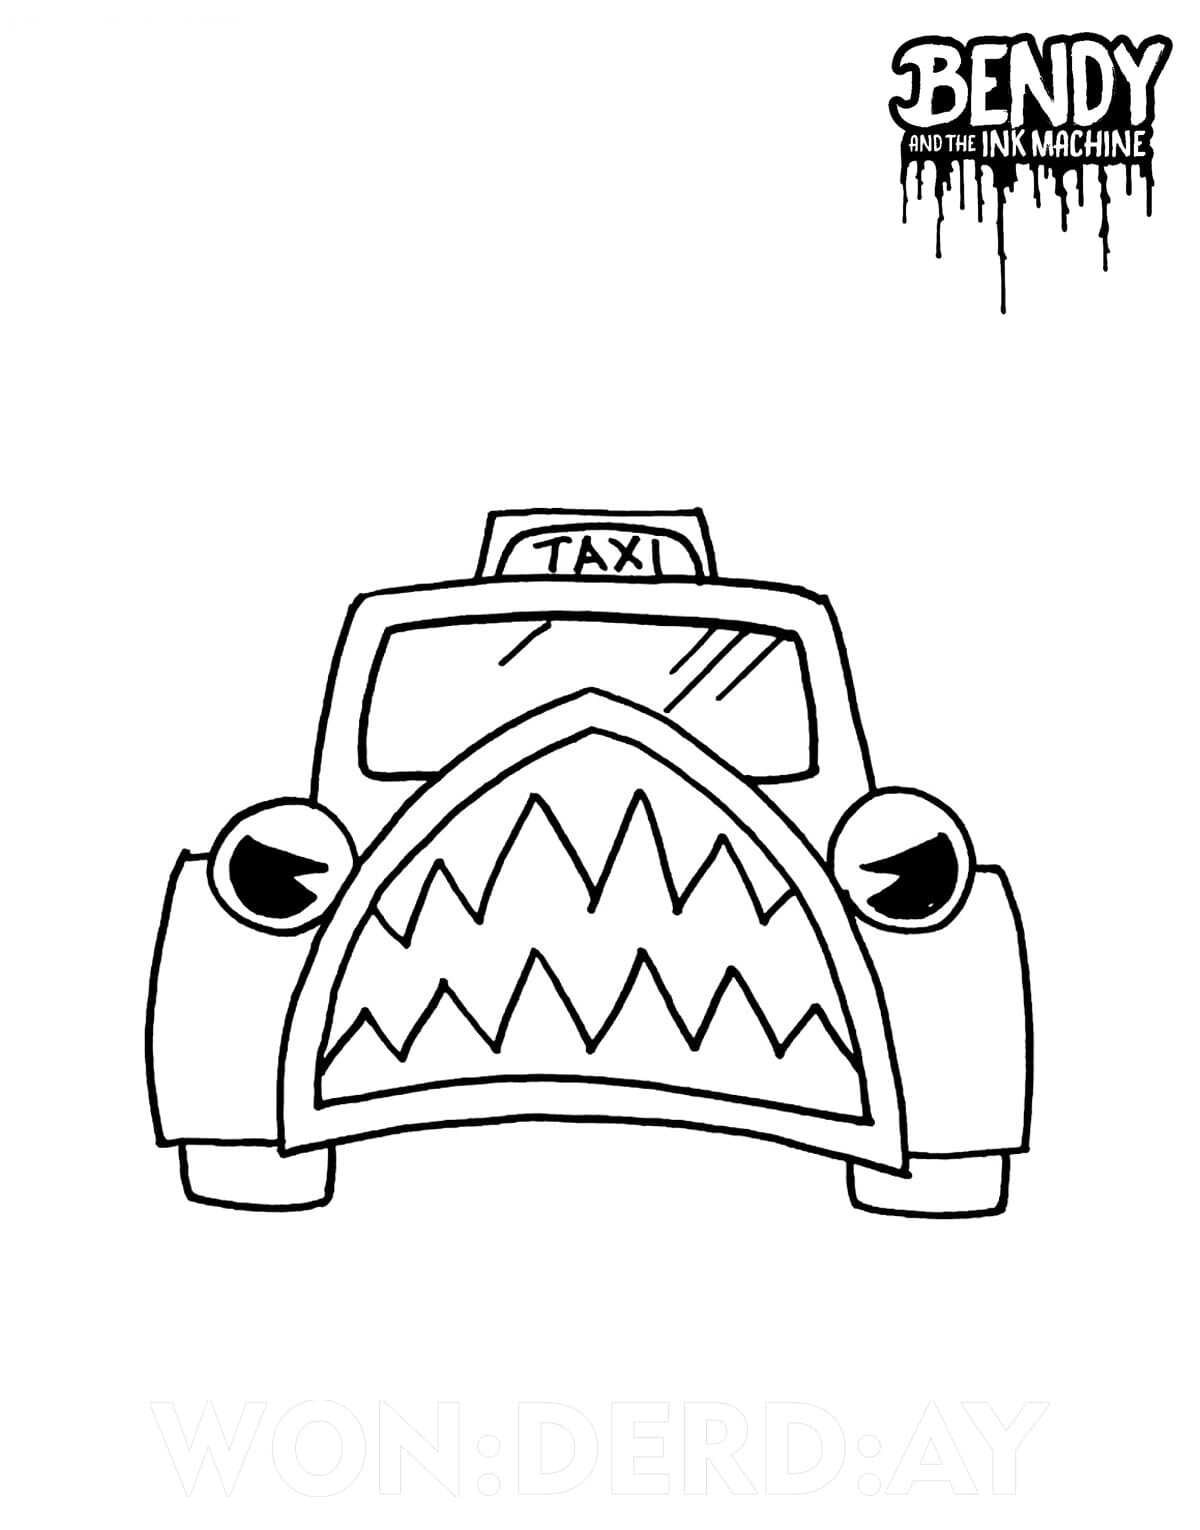 Taxi In Bendy In Nightmare Run From Bendy And The Ink Machine Coloring Pages